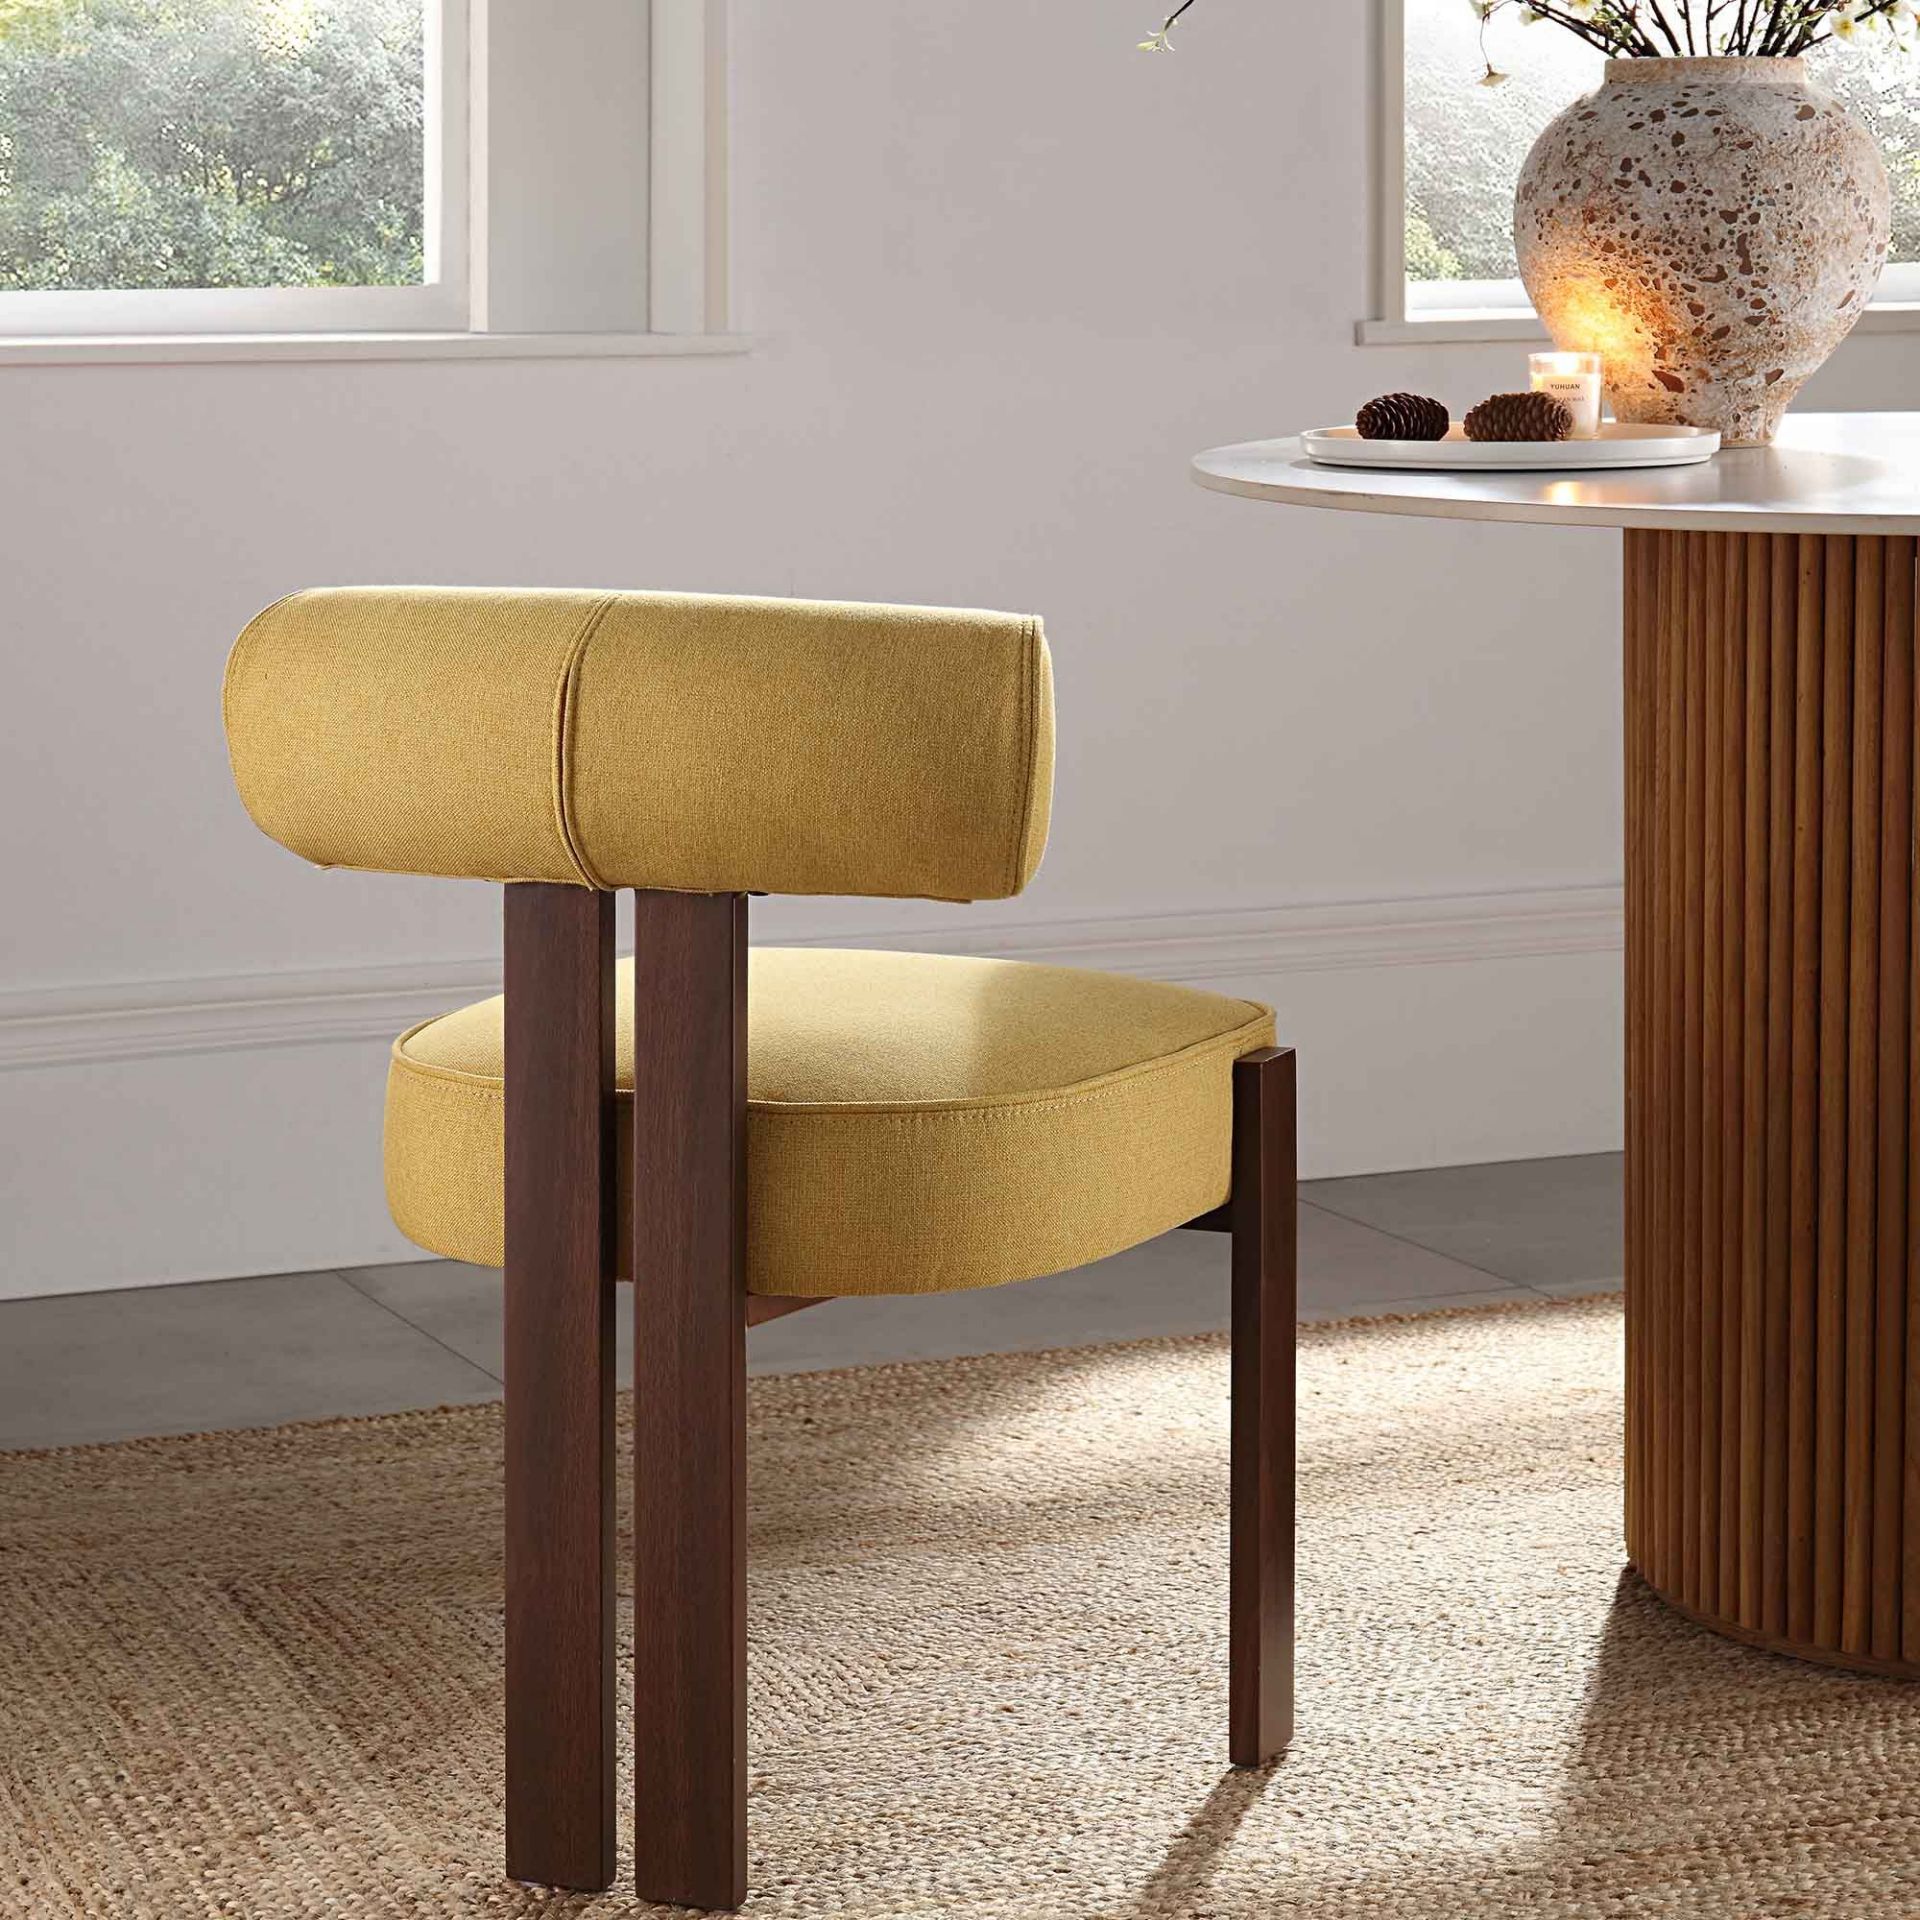 Ophelia Honey Gold Fabric Dining Chair. - R14. RRP £199.99. Upholstered with beautiful yellow fabric - Image 2 of 2